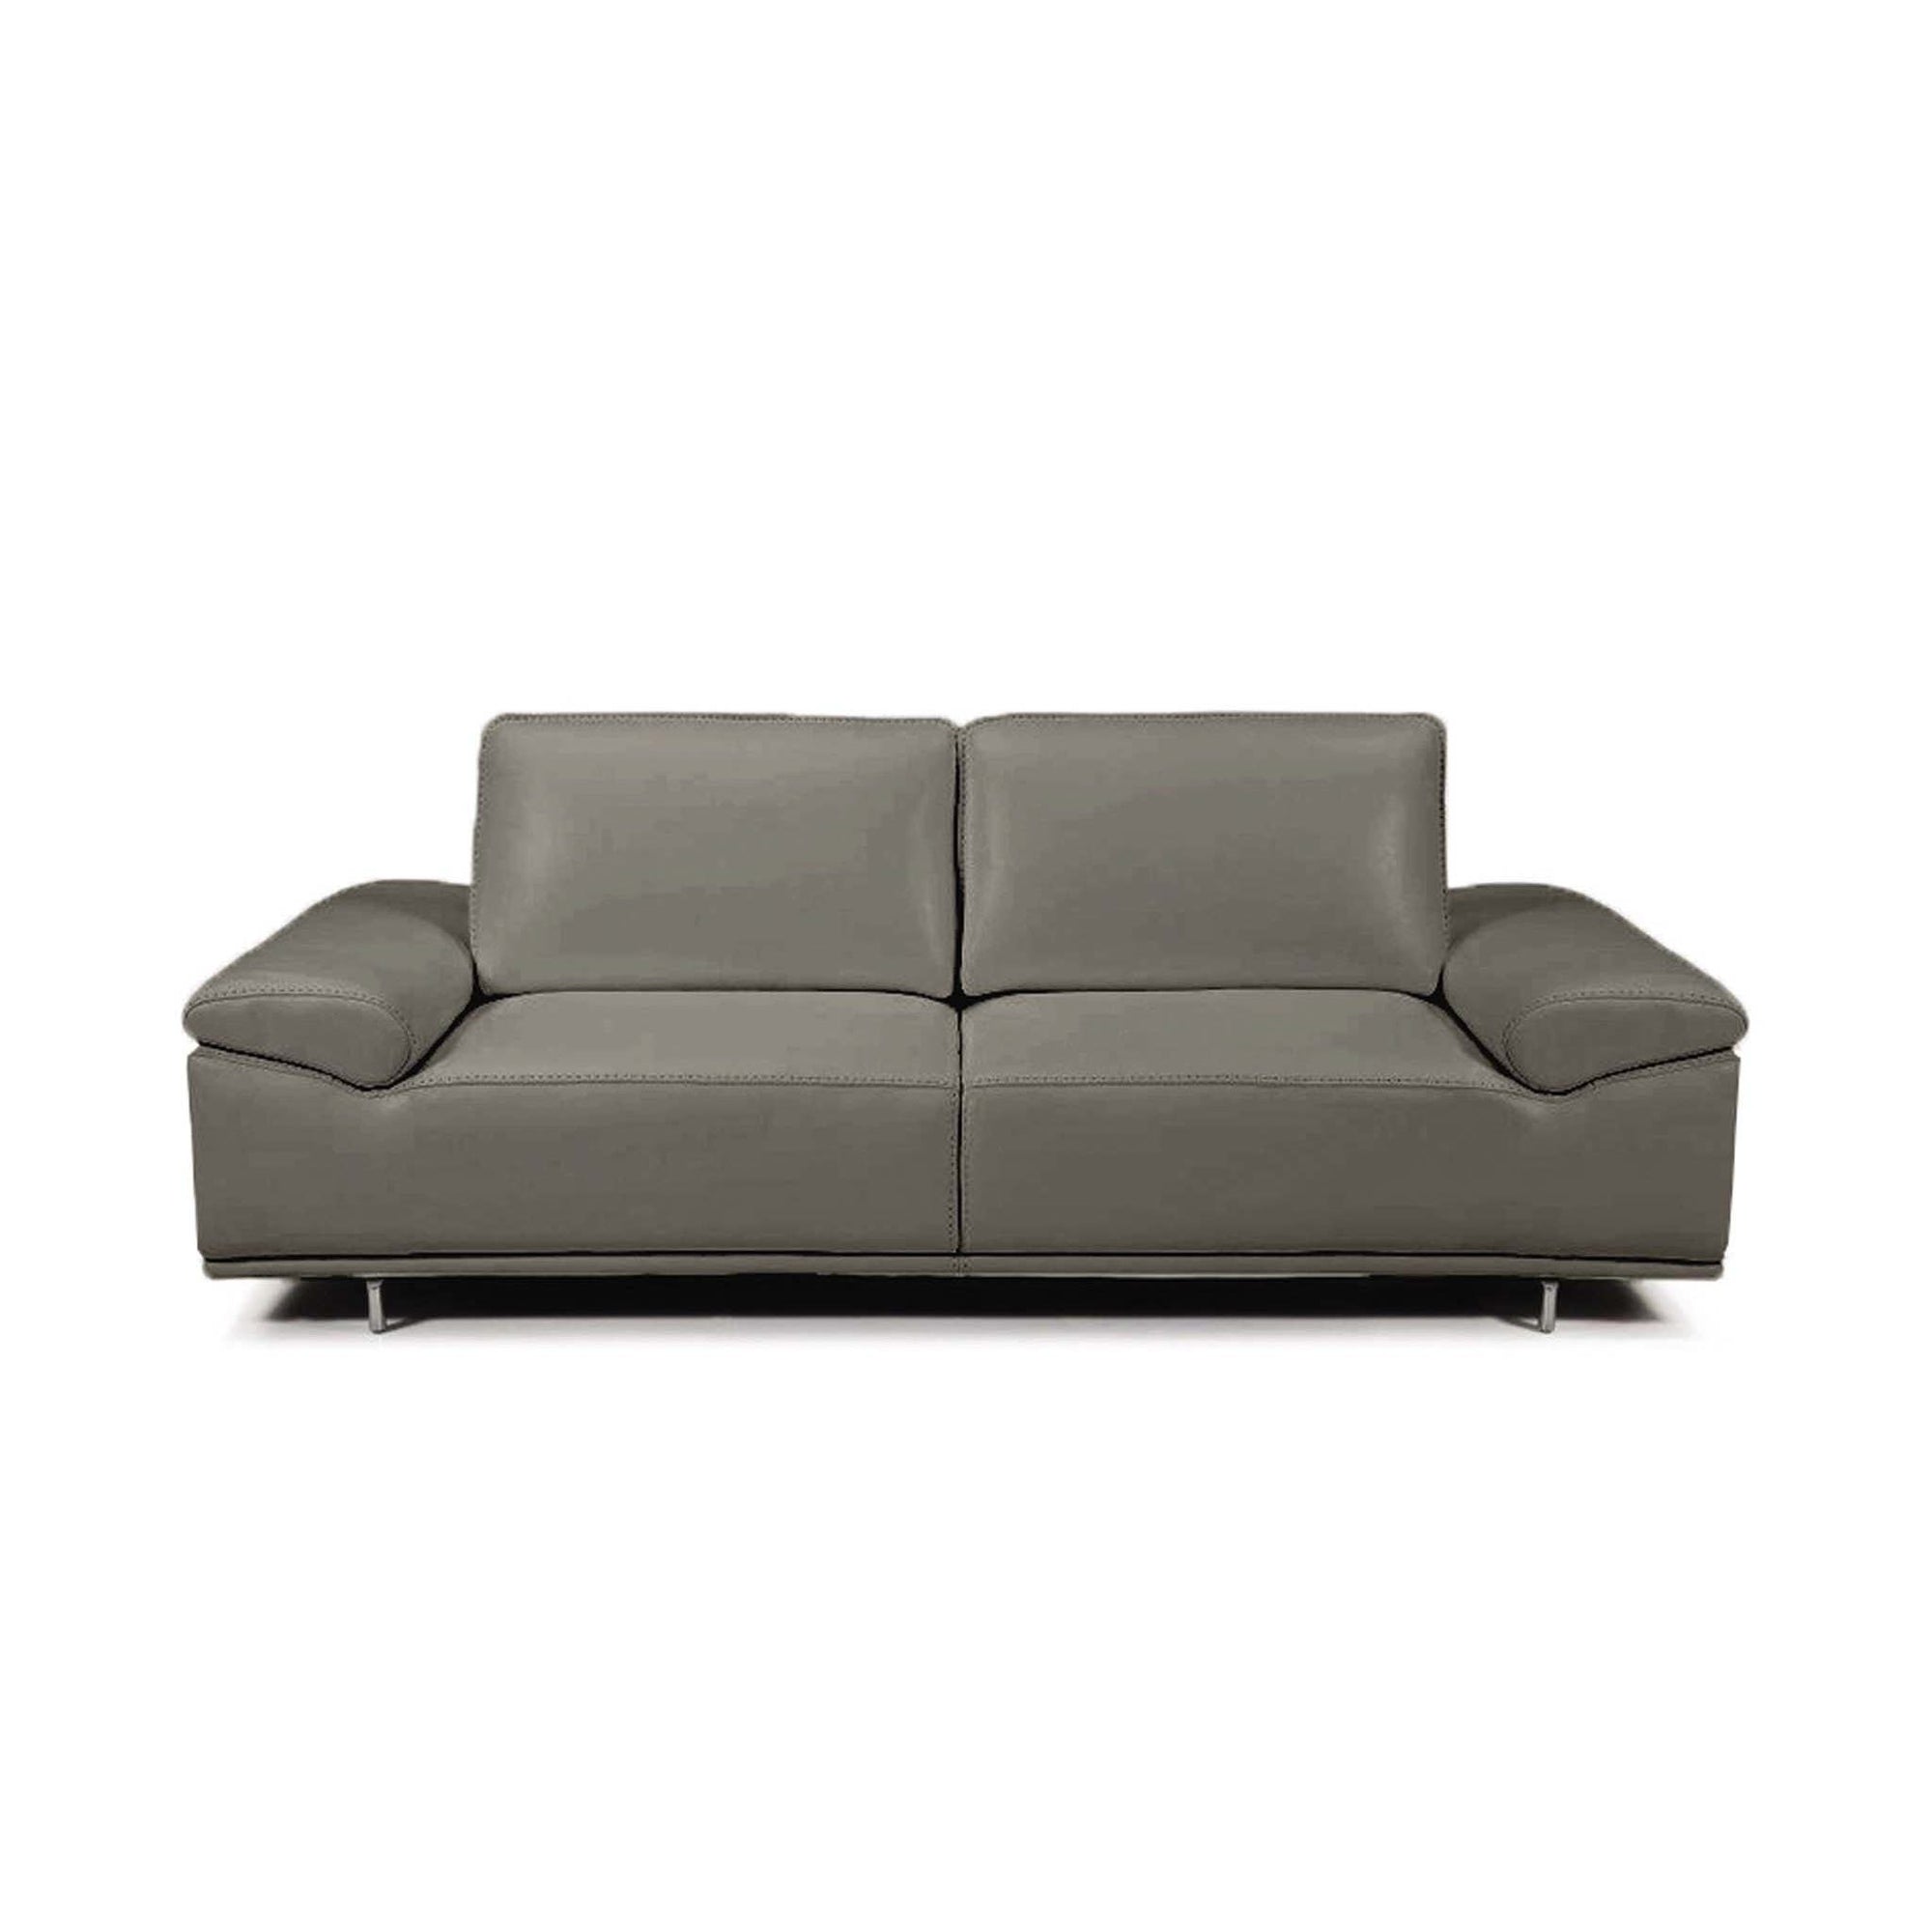 Bellini-Roxanne Dark Grey Sofa With Adjustable Back Cushions and Arm Rests-Sofas-MODTEMPO